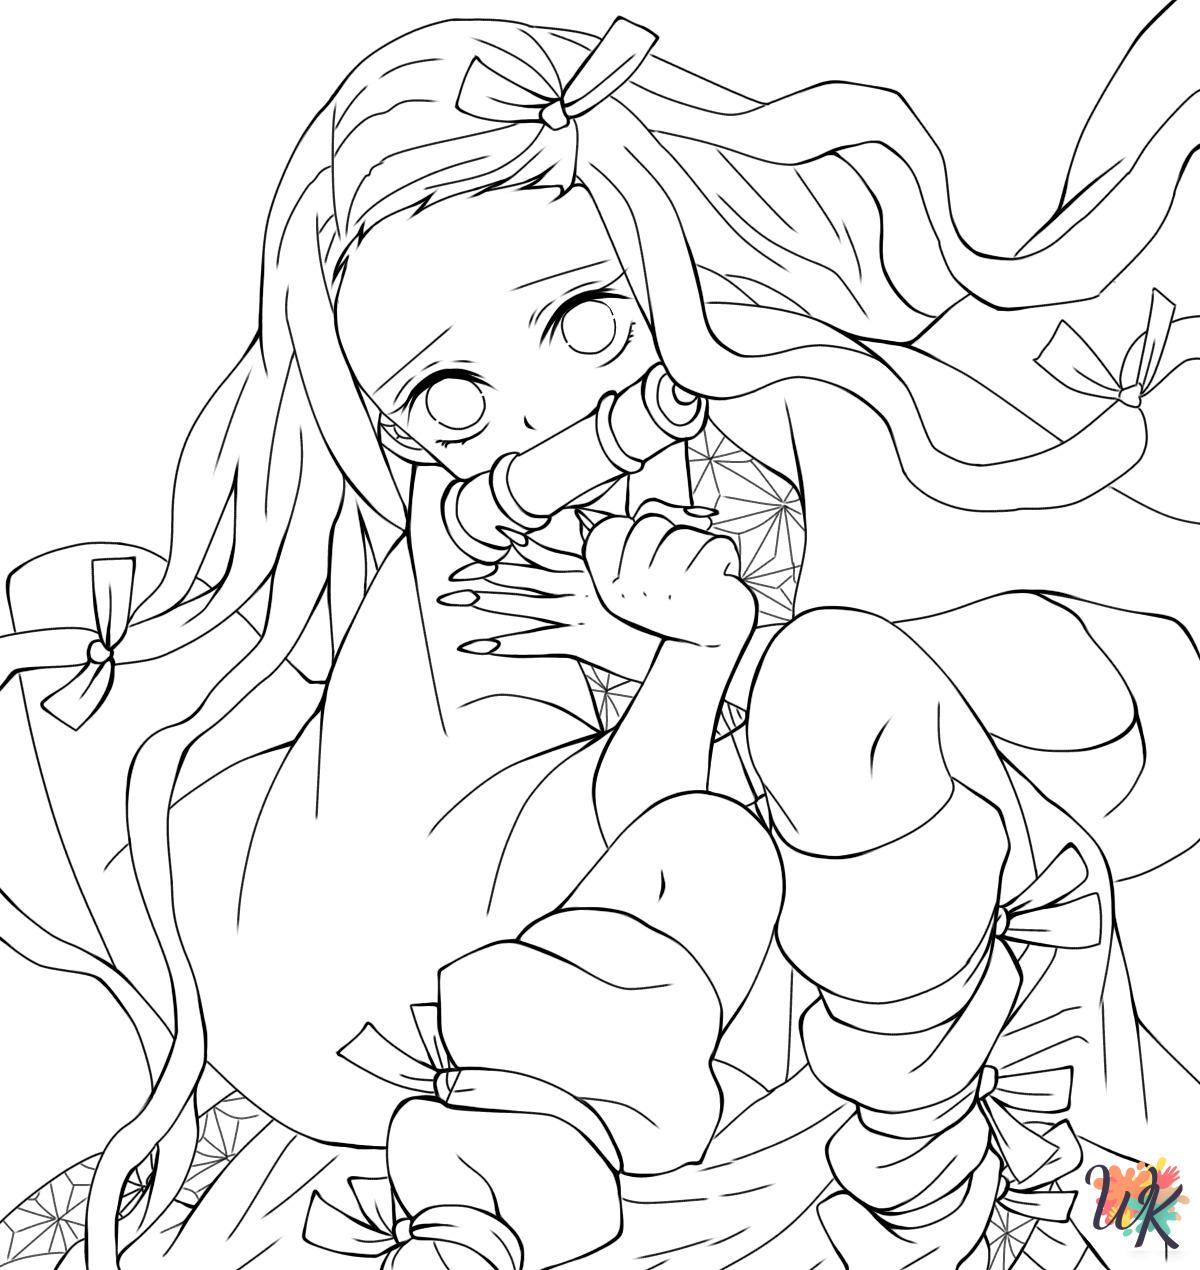 Nezuko coloring pages for kids